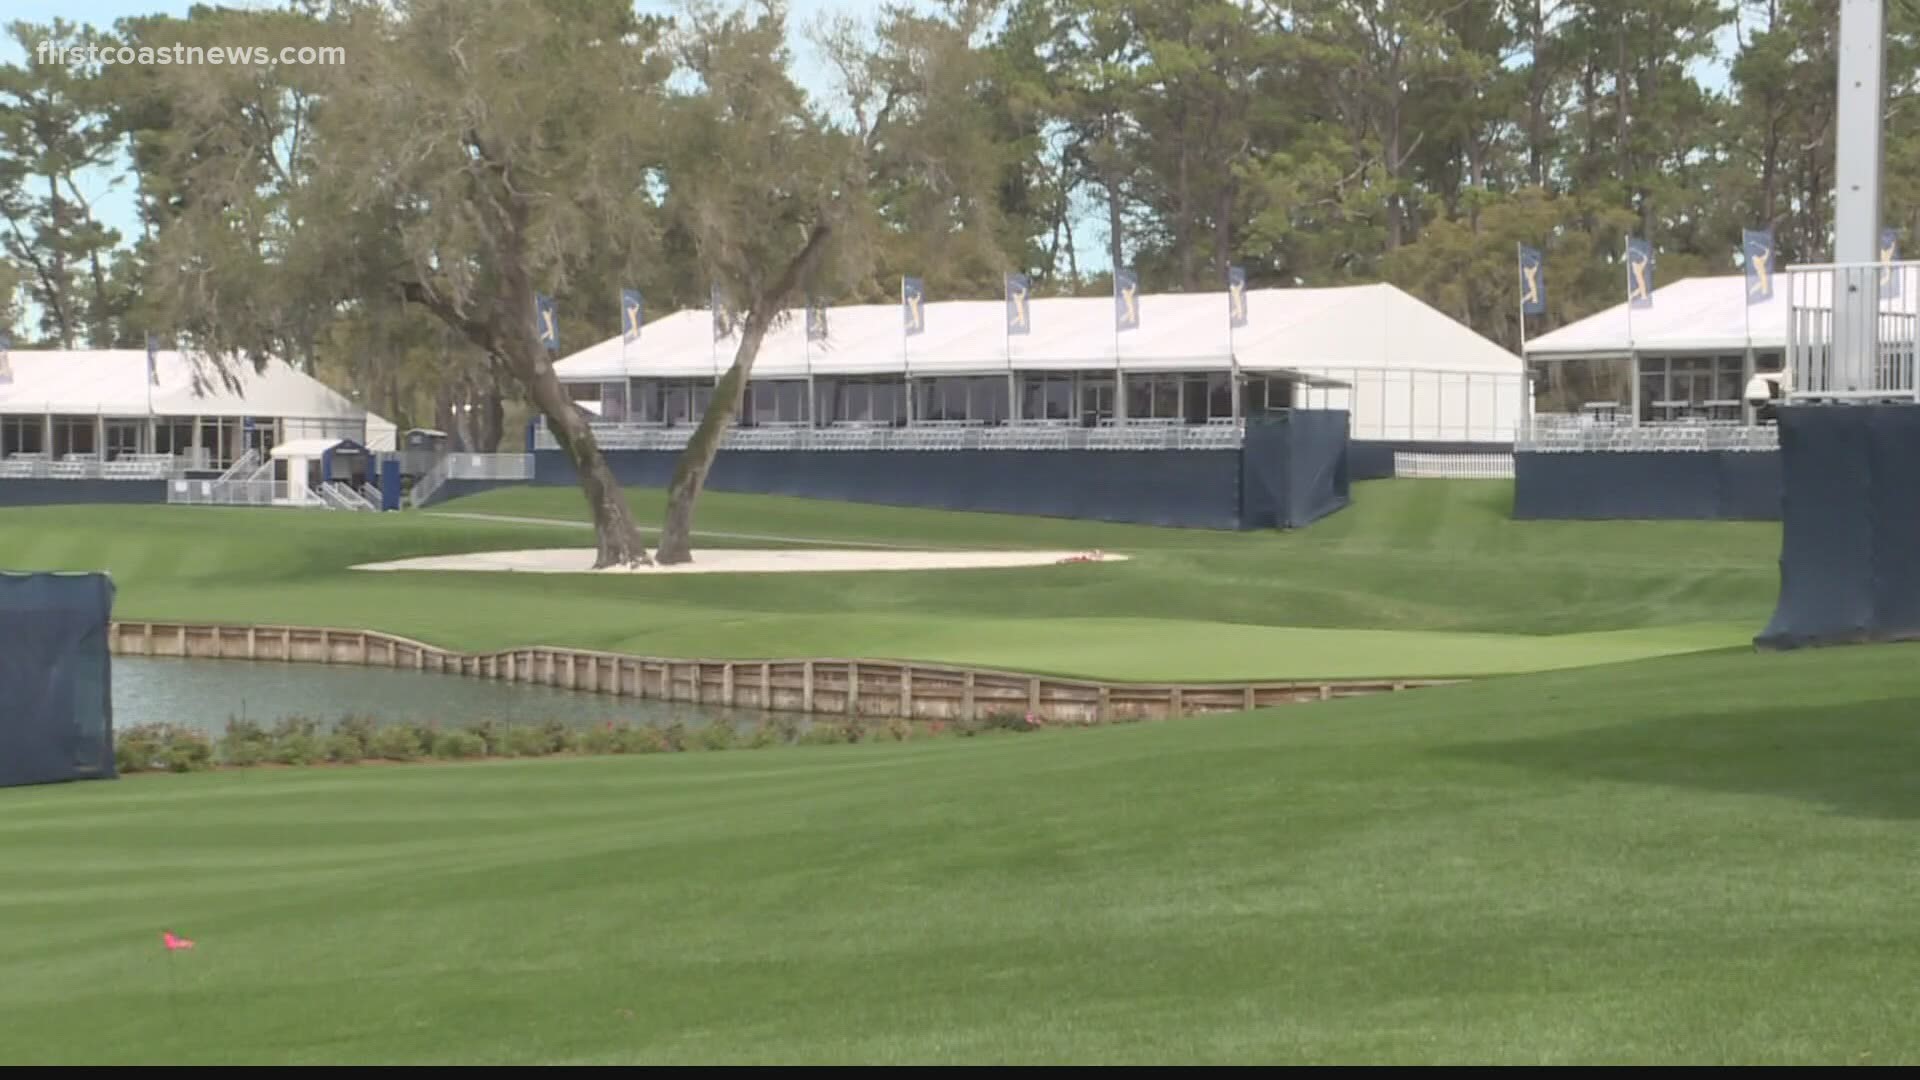 Tickets to THE PLAYERS Championship go on sale Tuesday firstcoastnews